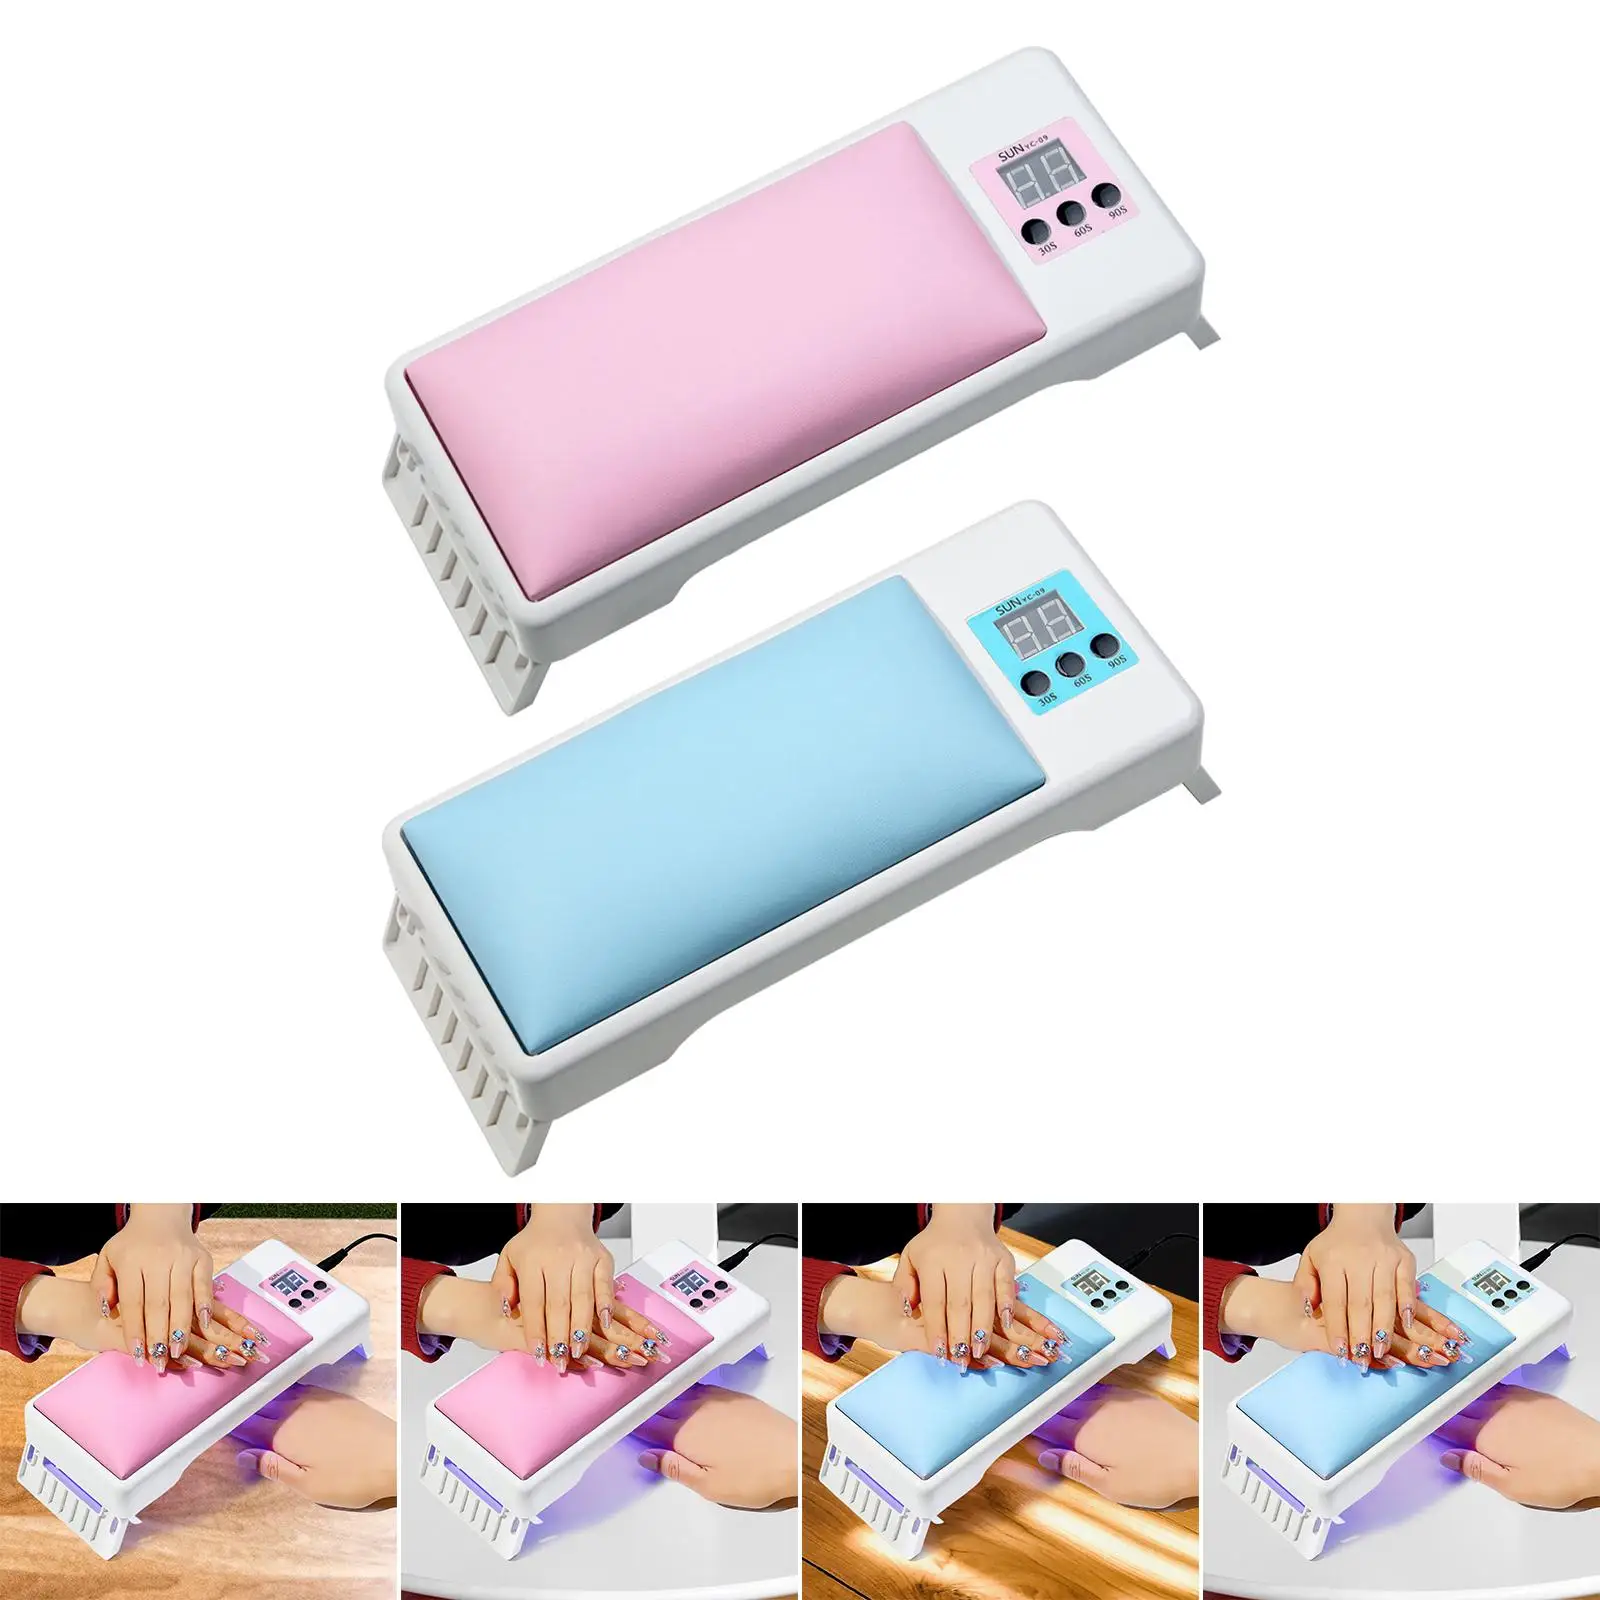 Multifunction Nail Arm Rest with LED Nail Lamp Nail Light Manicure Tool 3 Timer Setting LED Display for Salon and Home Use